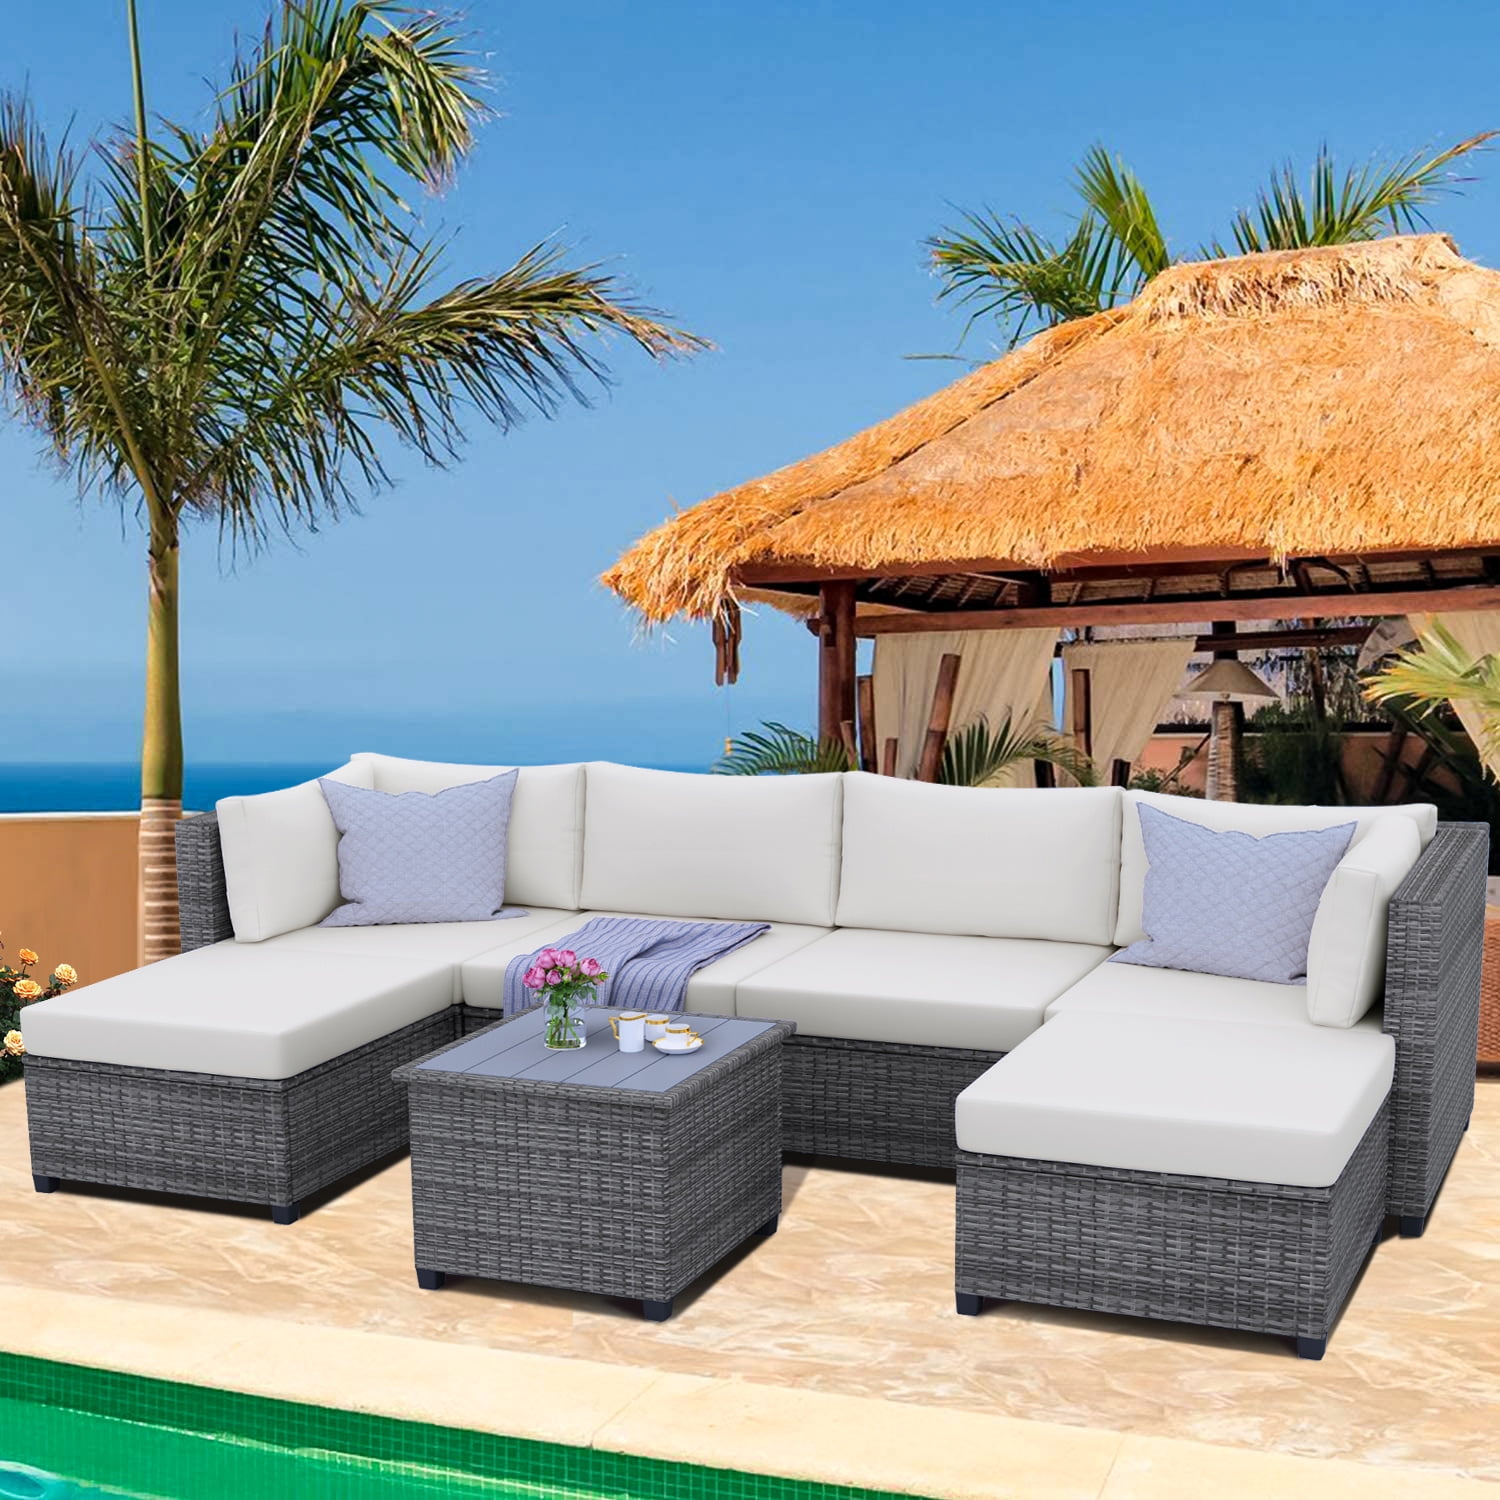 Details about   UV Heavy Duty Garden Patio Furniture Table Cover for Rattan Table Set Outdoor UK 